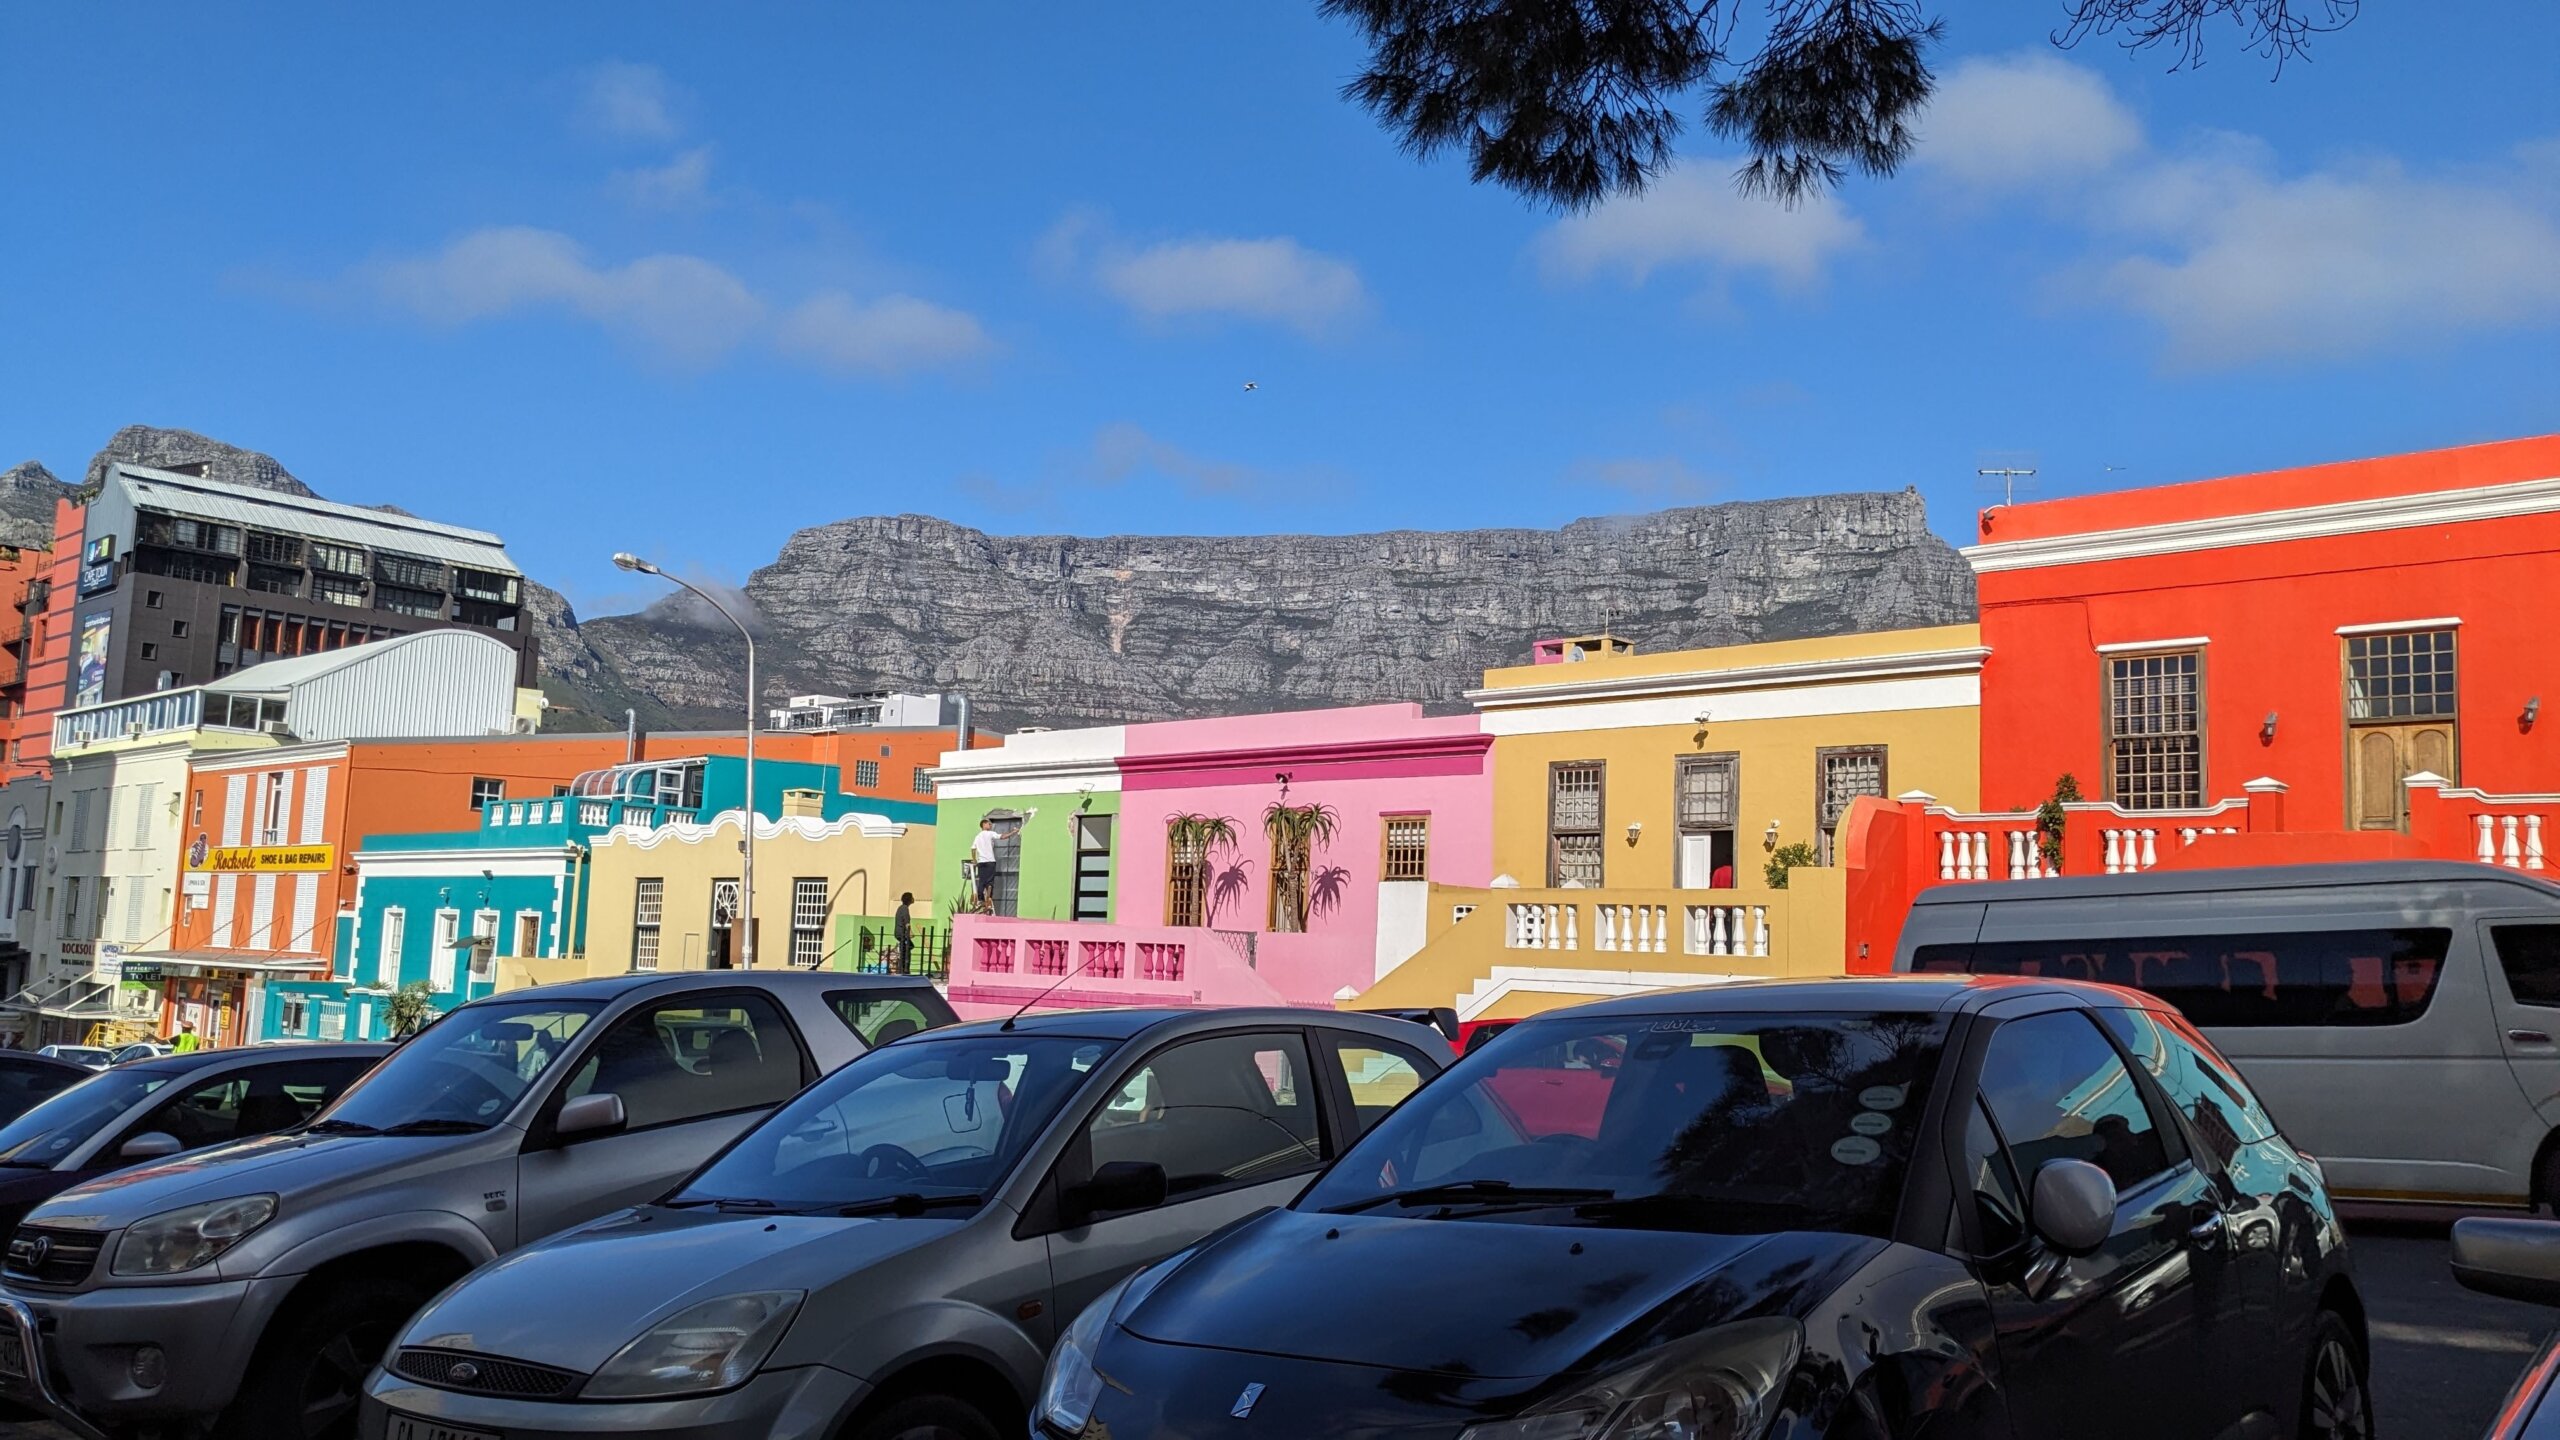 Colorful houses of Bo-Kaap, the Muslim neighborhood of Cape Town, South Africa